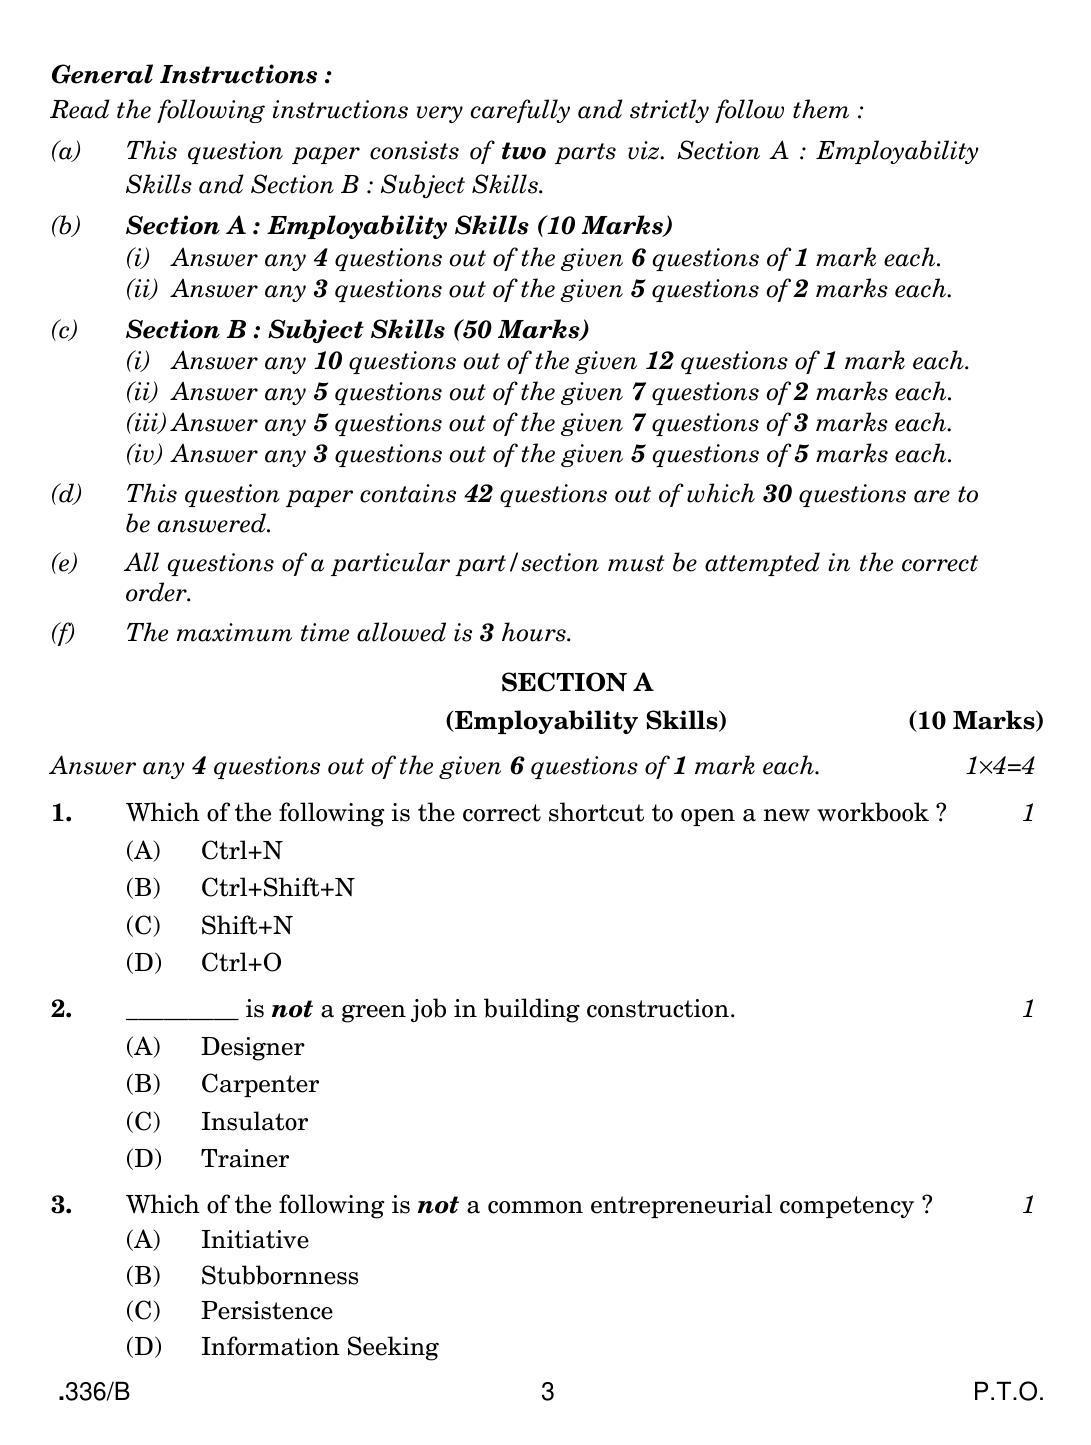 CBSE Class 12 Marketing 2020 Compartment Question Paper - Page 3